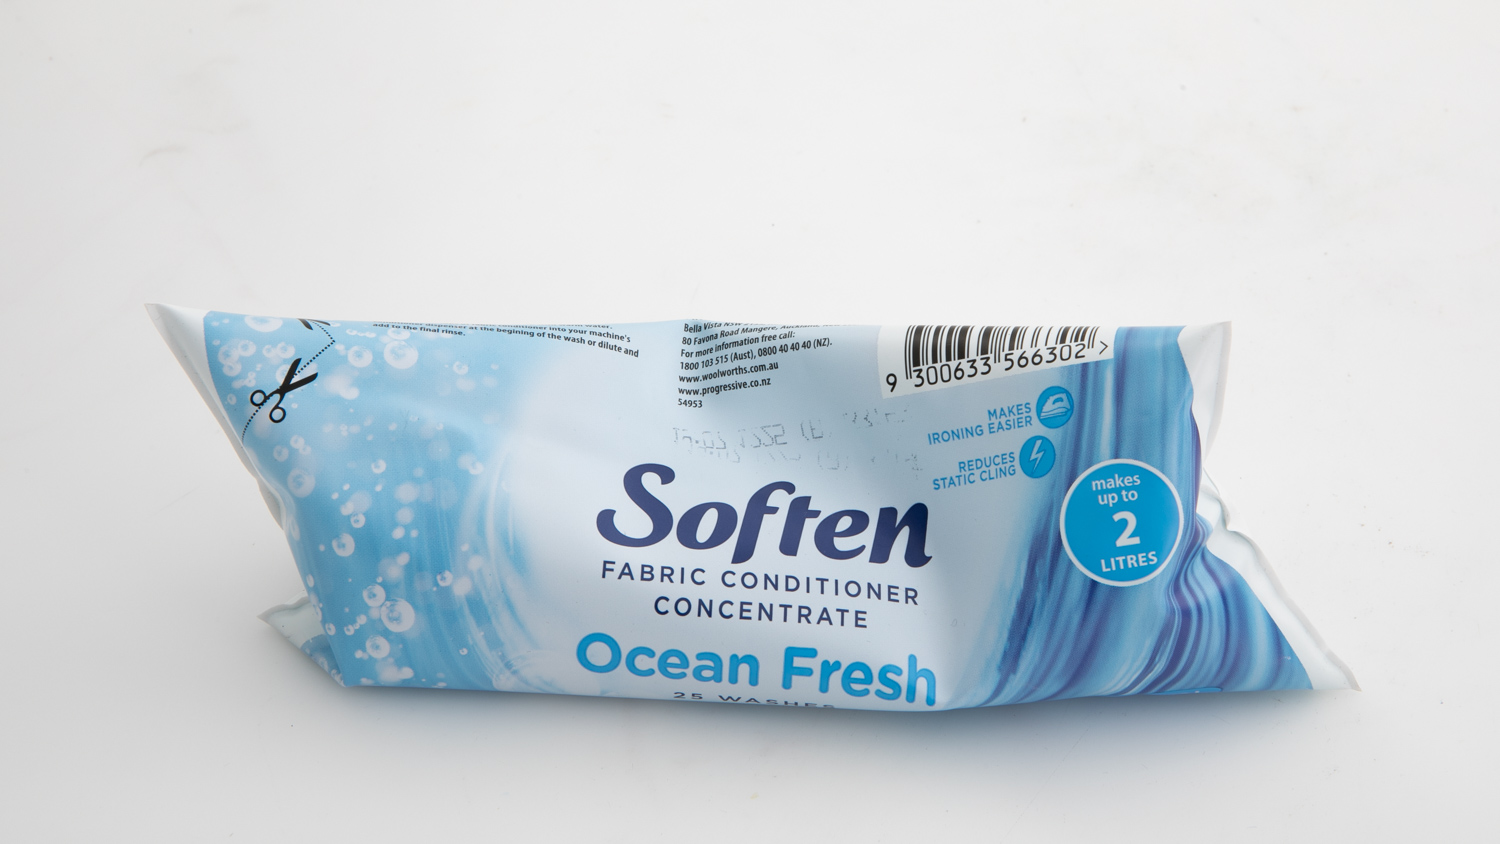 Woolworths Soften Fabric Conditioner Concentrate Ocean Fresh carousel image